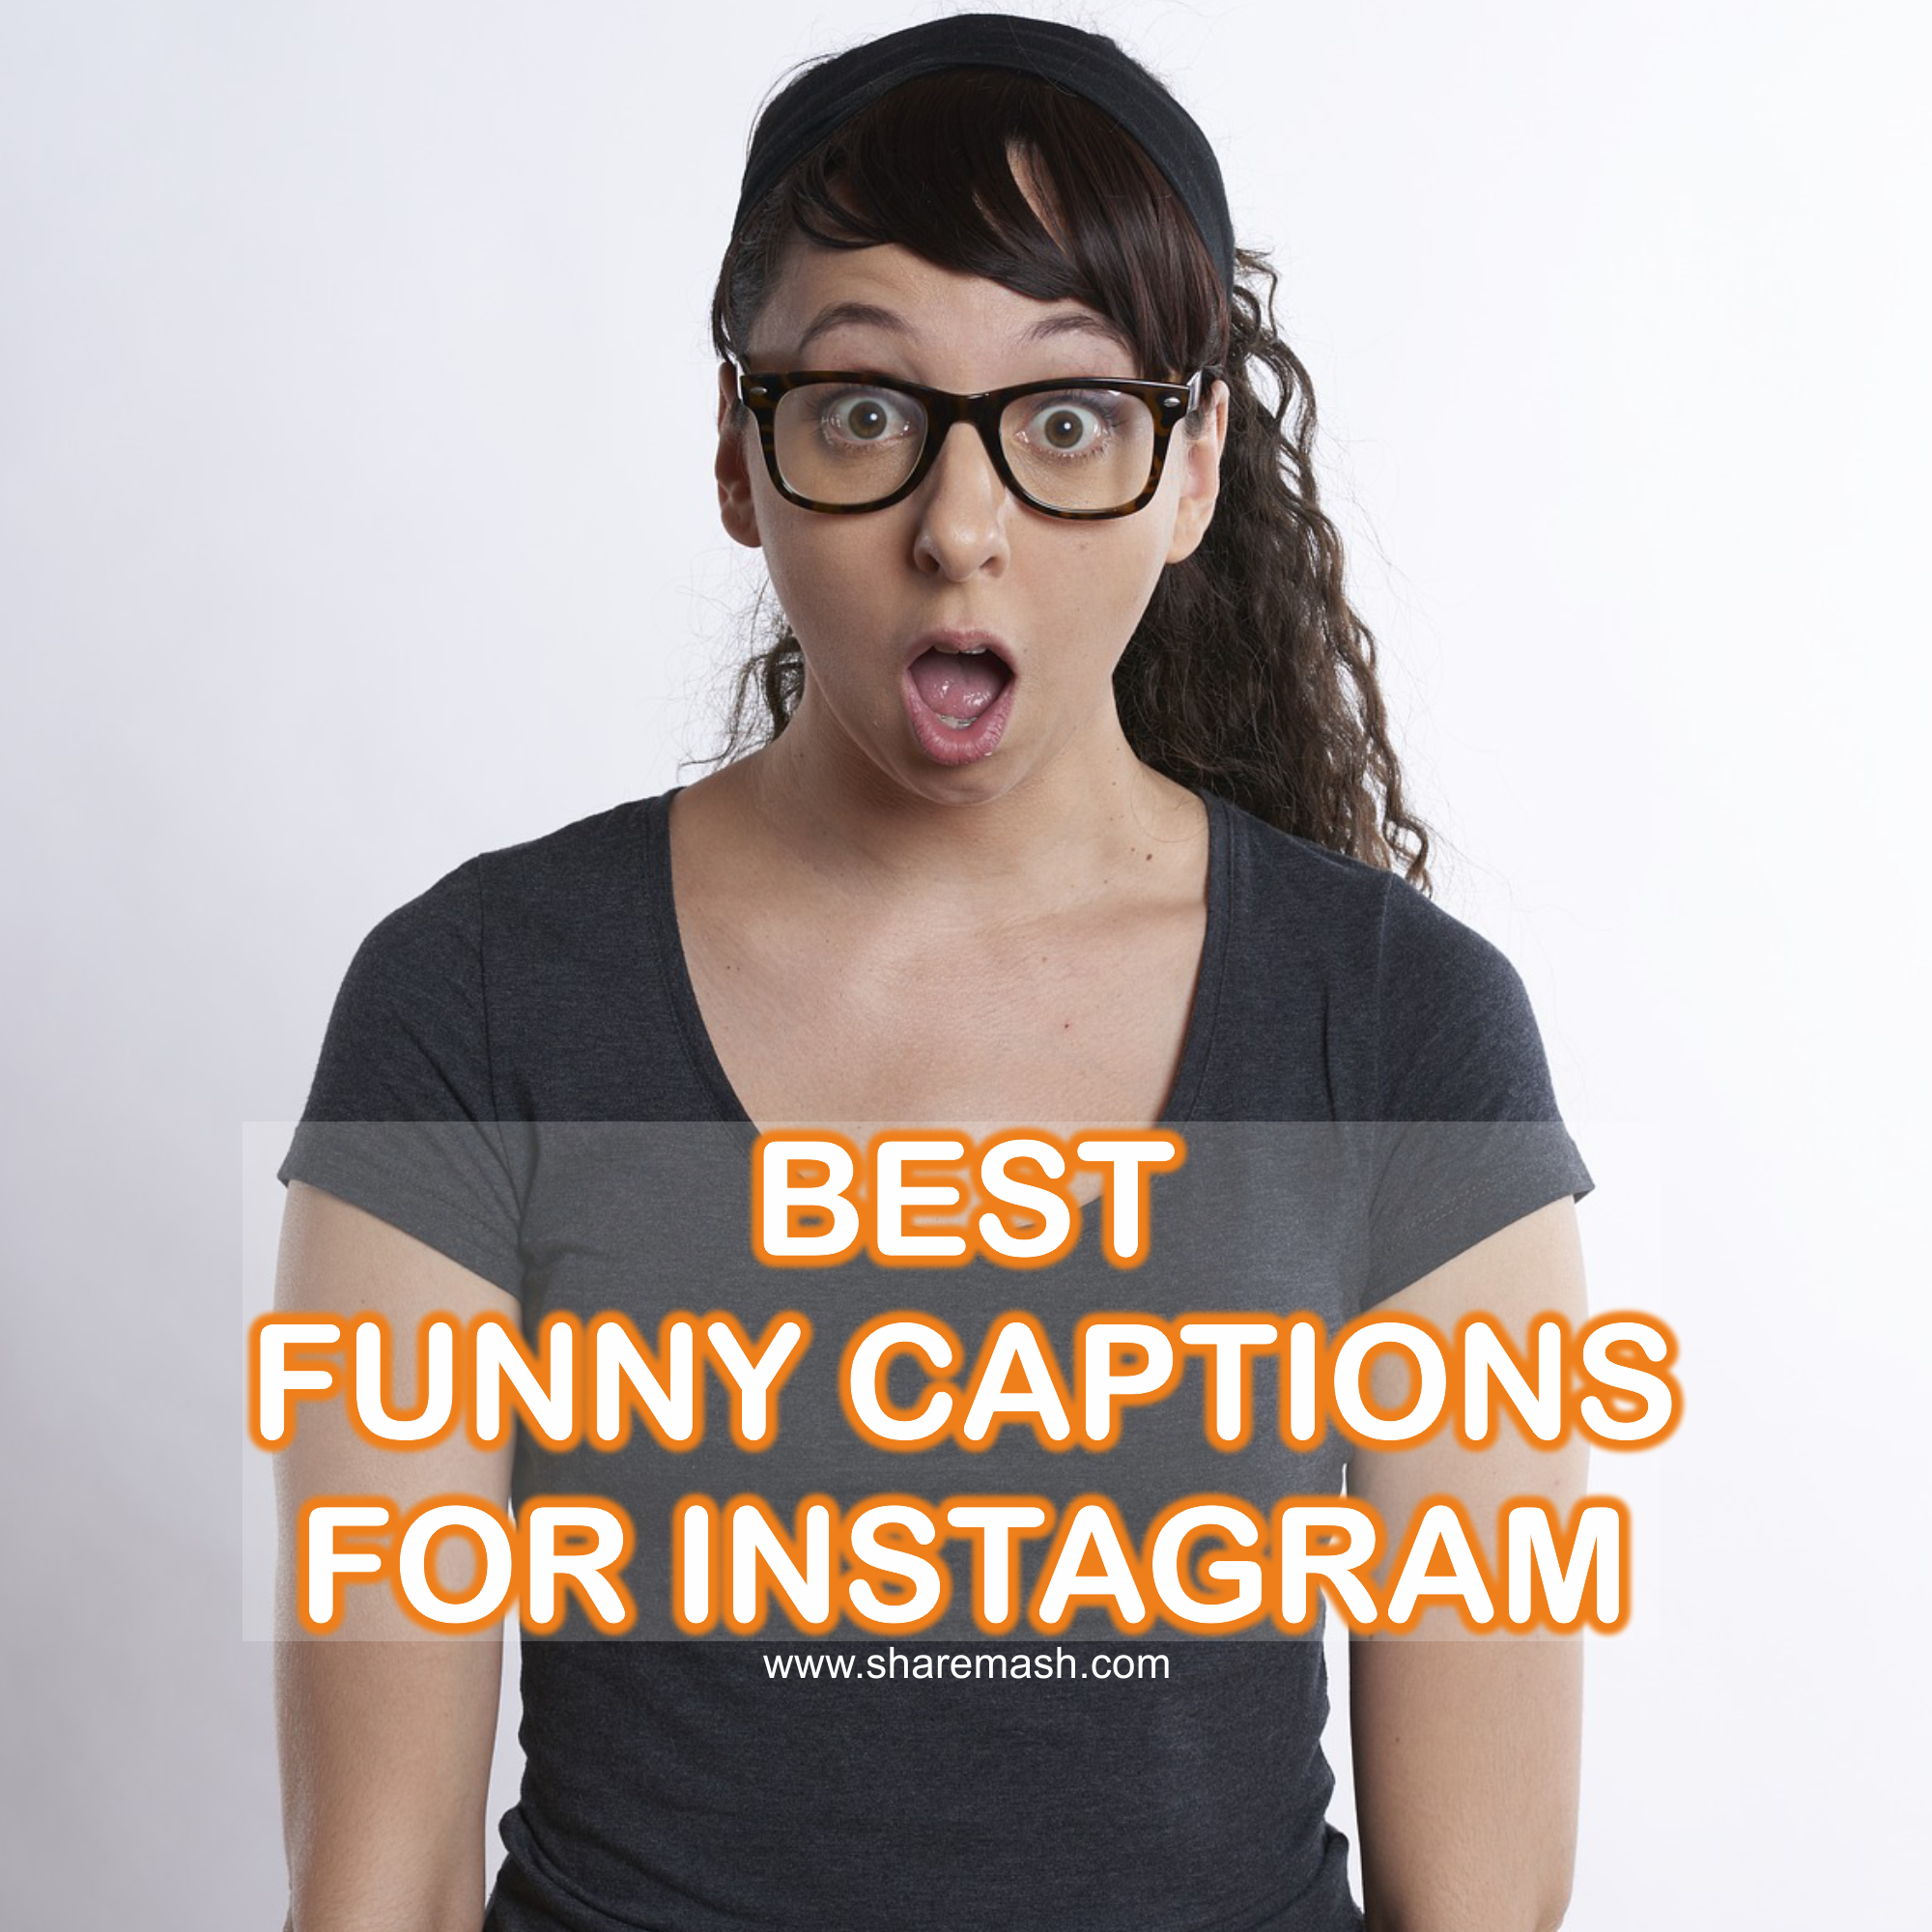 100+ [Best] Funny Captions for Instagram (2021) - PMCAOnline